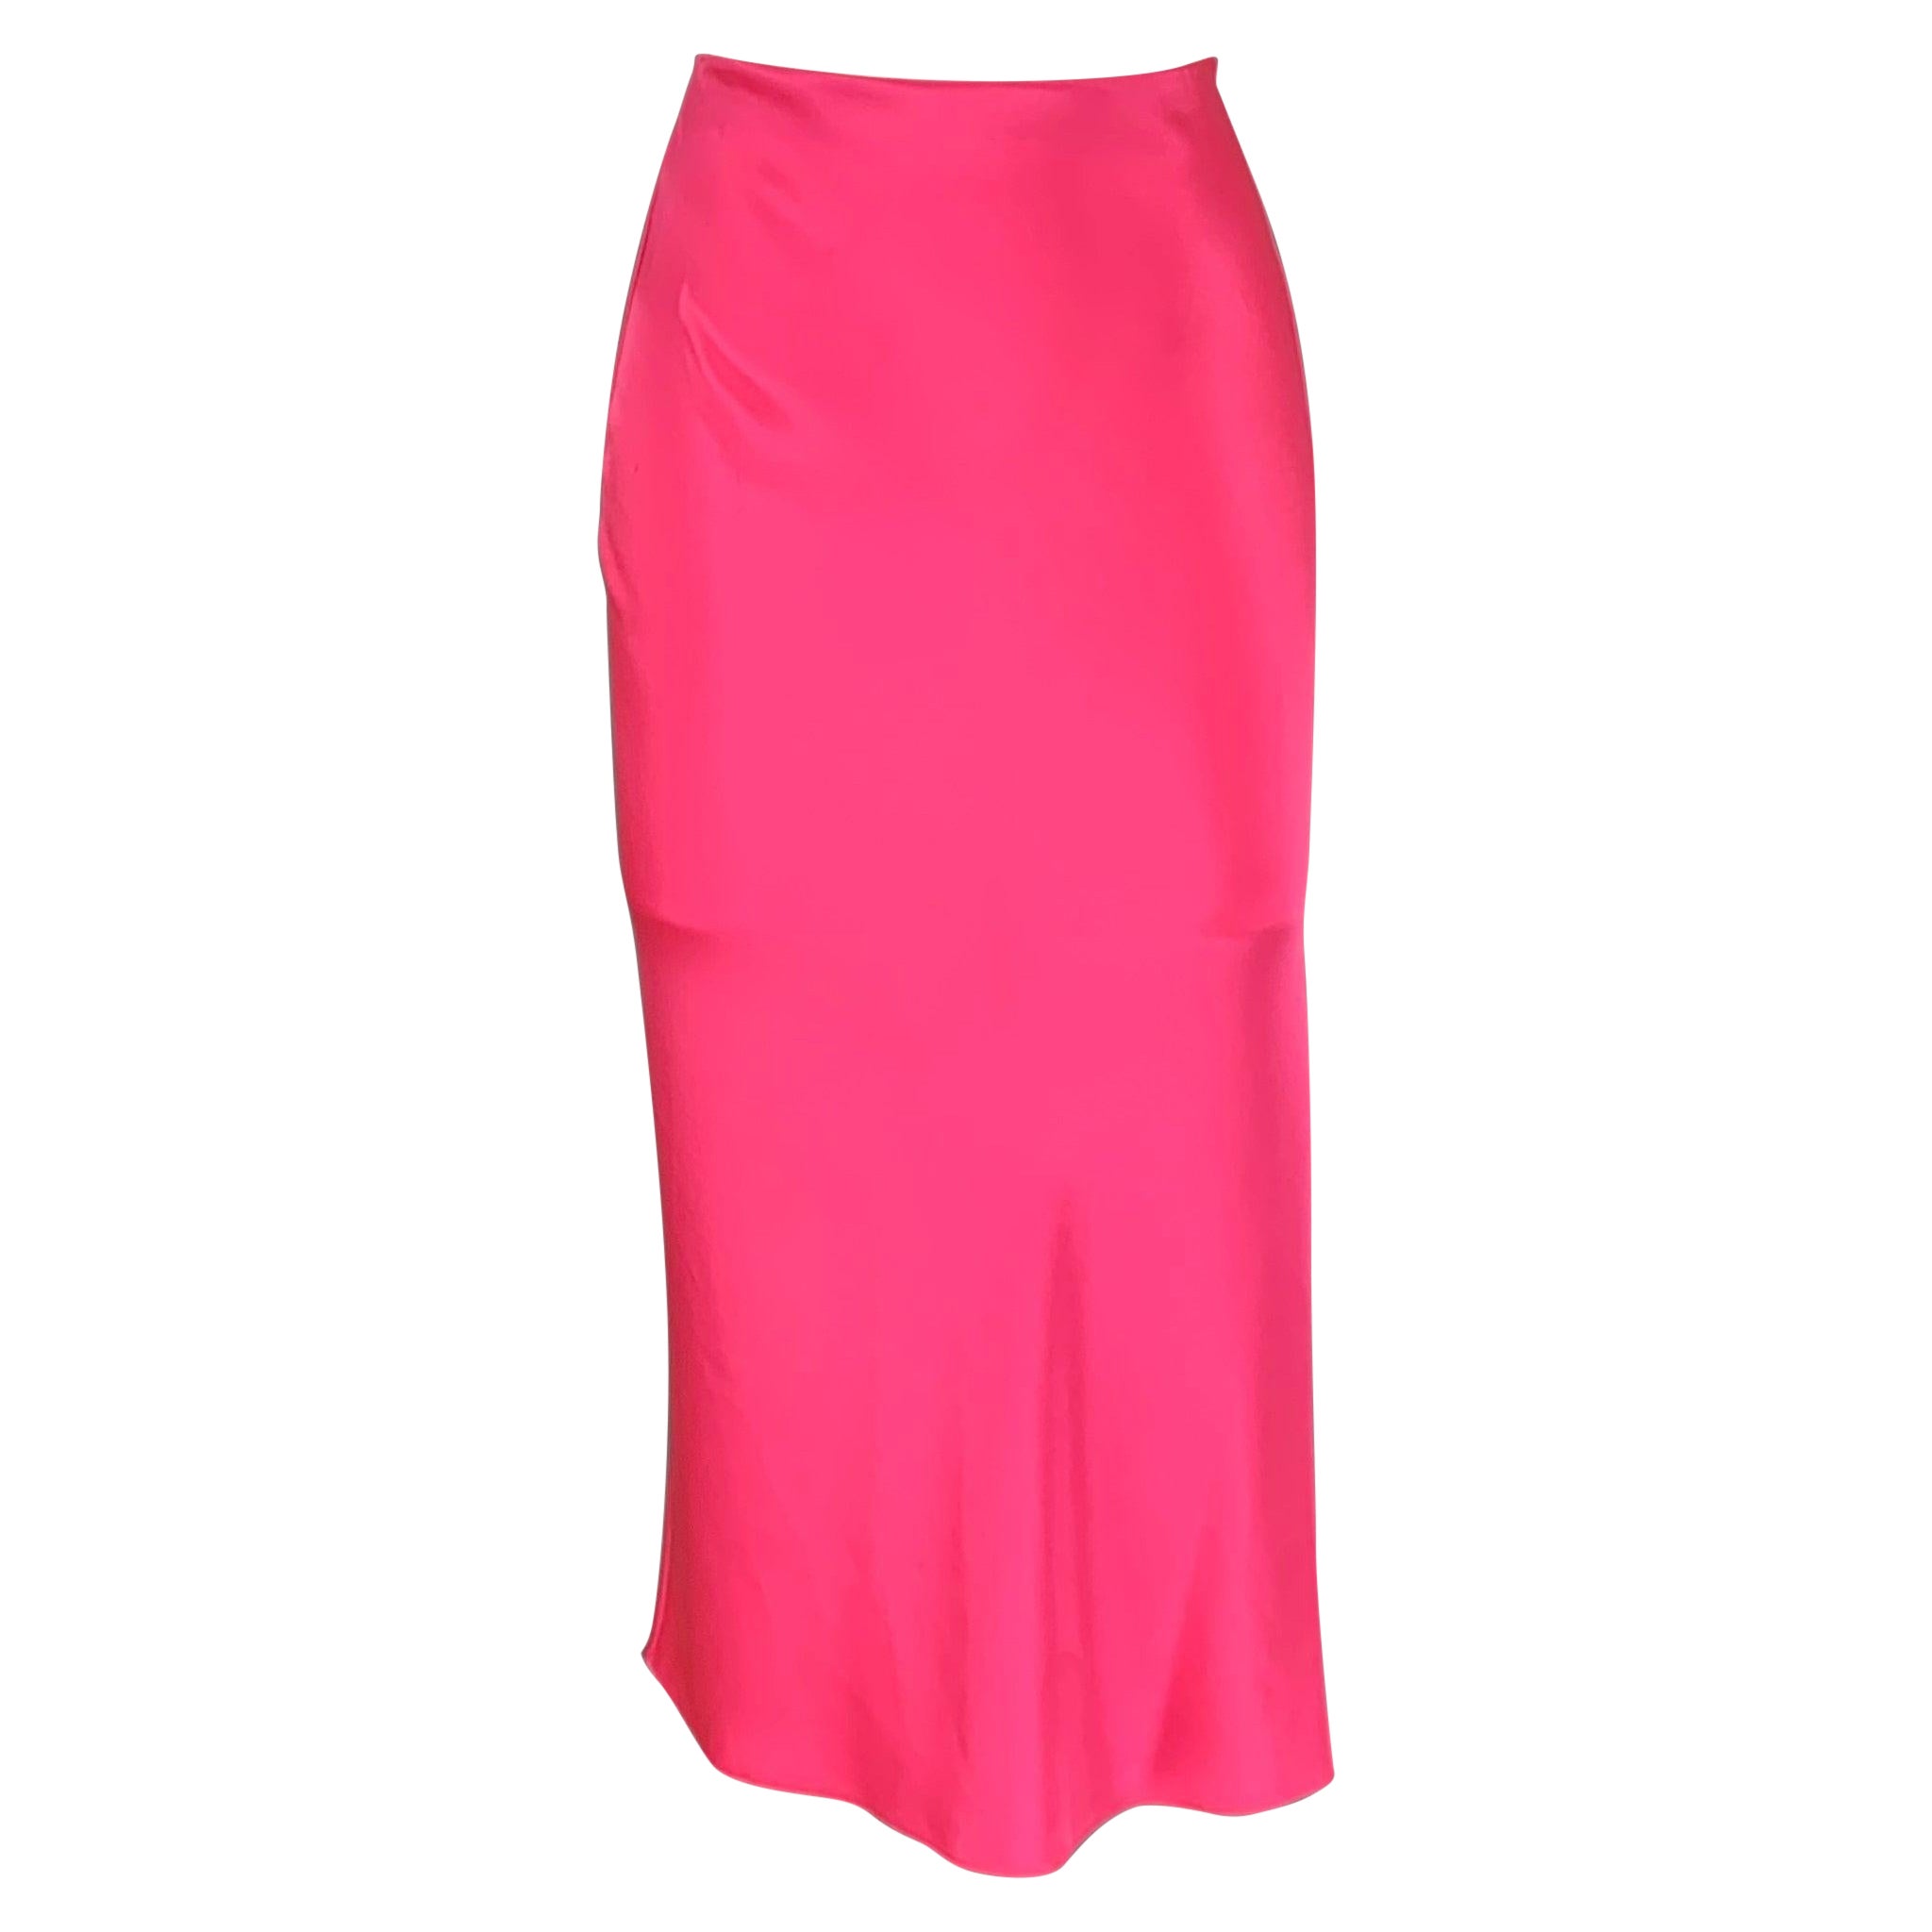 ALICE + OLIVIA Size 0 Pink Triacetate Blend Solid A-Line Skirt For Sale